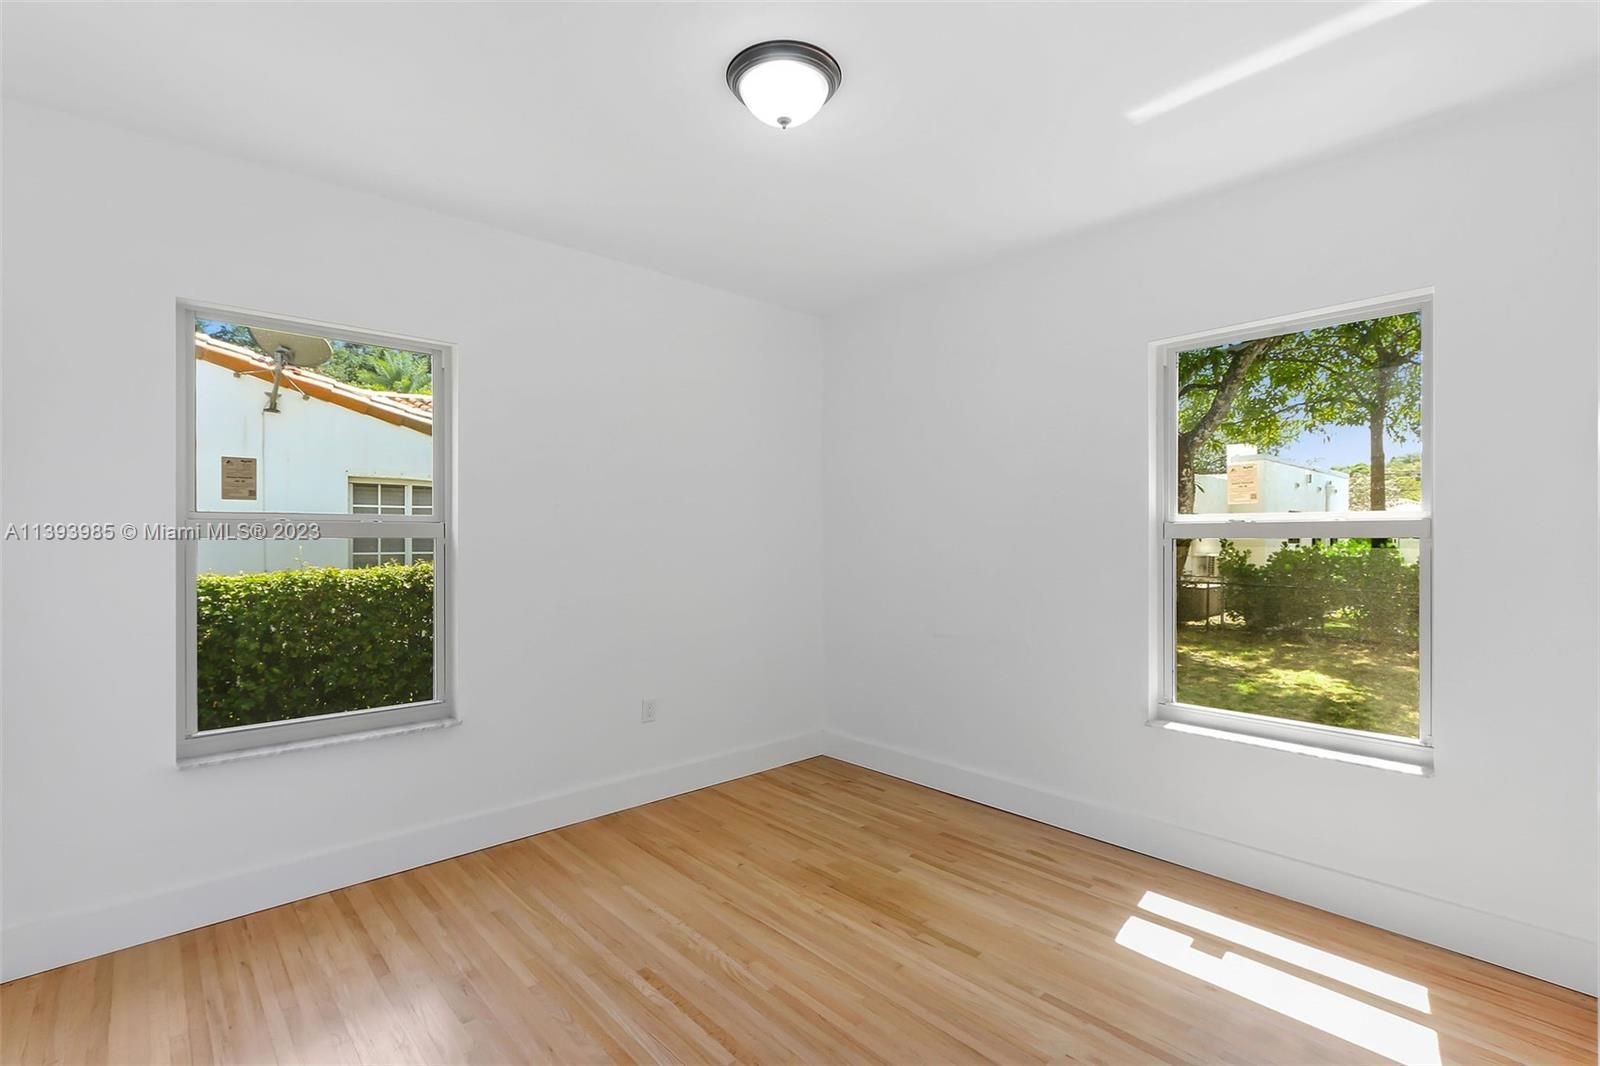 Real estate property located at 912 Alberca St., Miami-Dade County, Coral Gables, FL